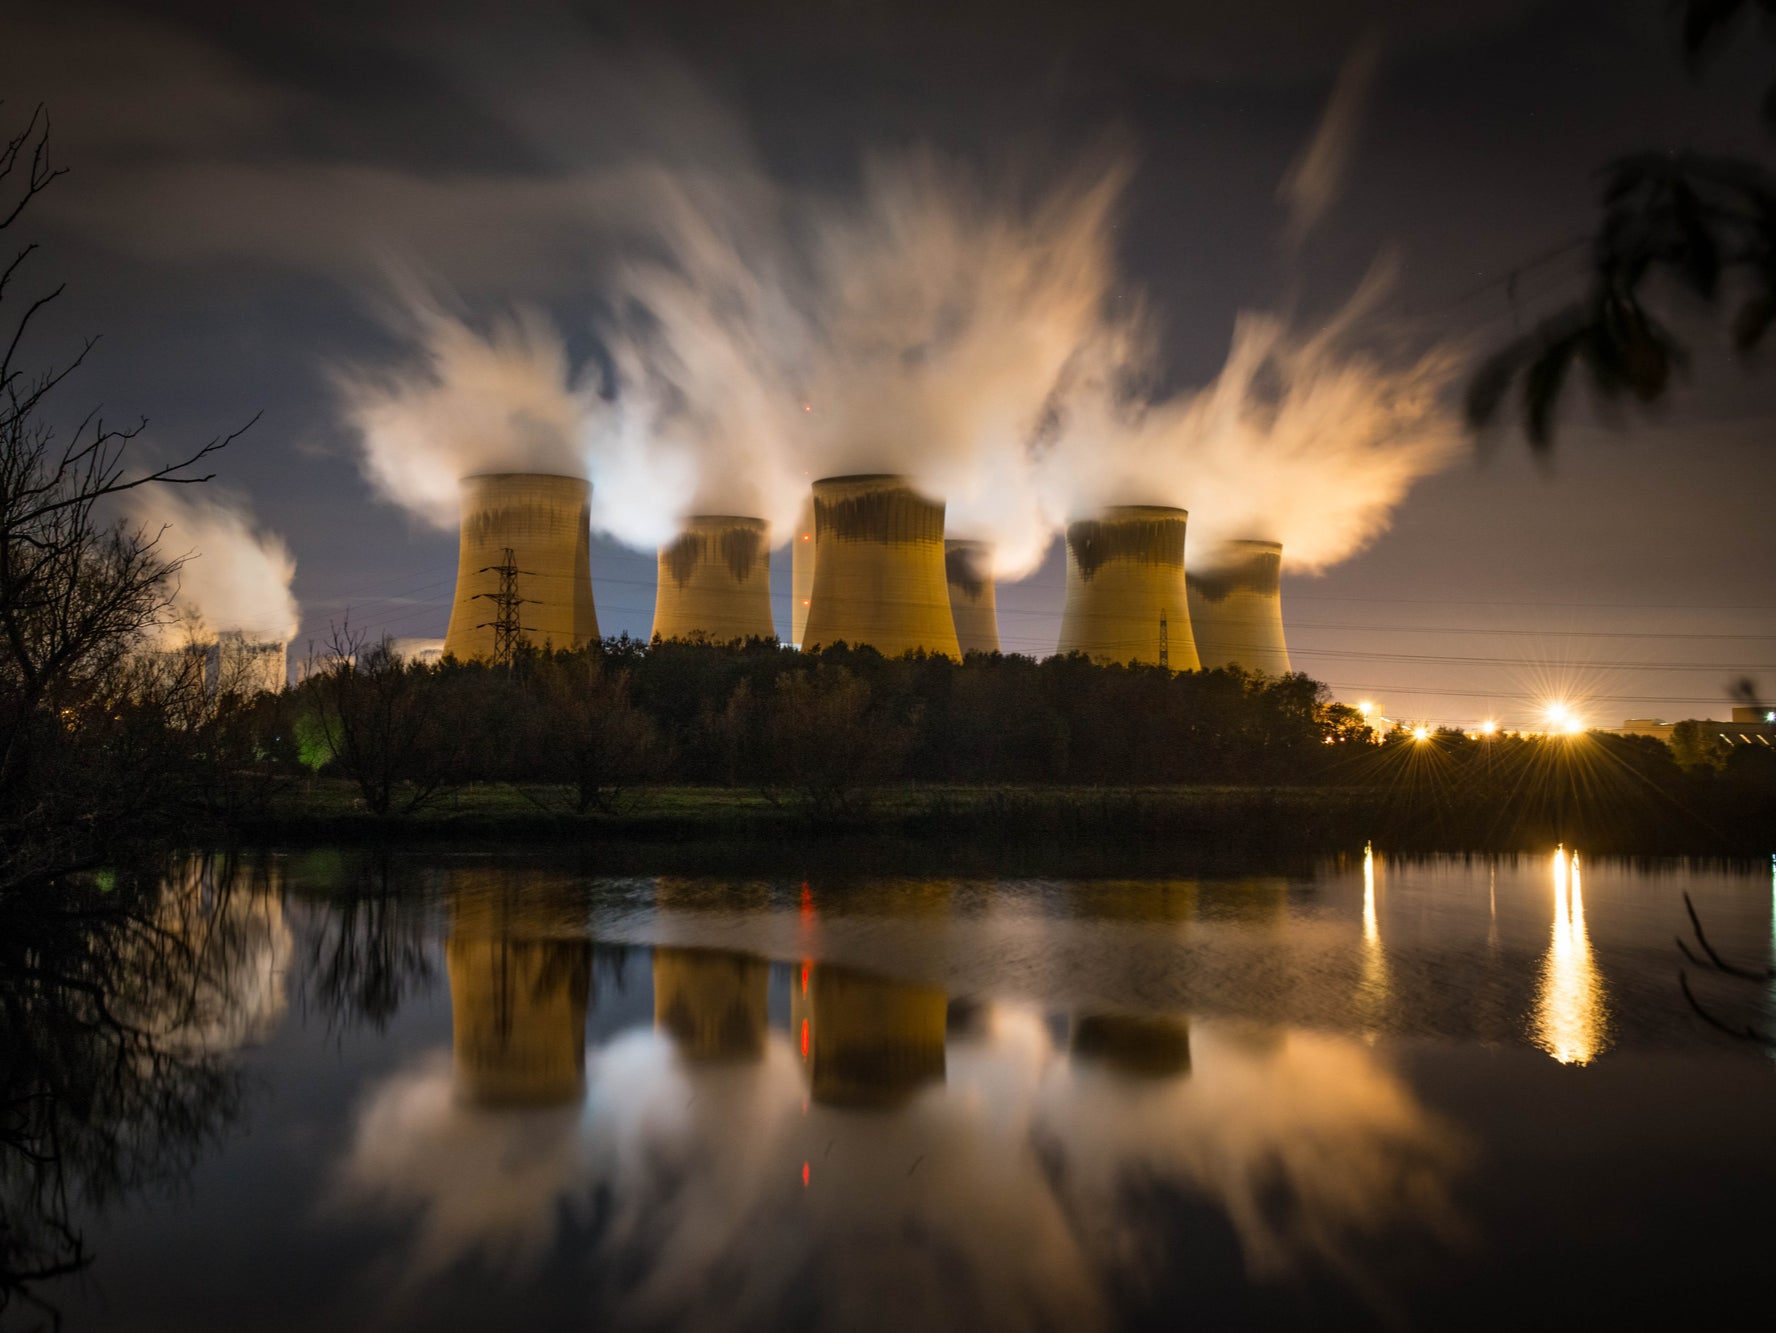 Drax power station releases over 13 million tonnes of CO2 a year from burning wood